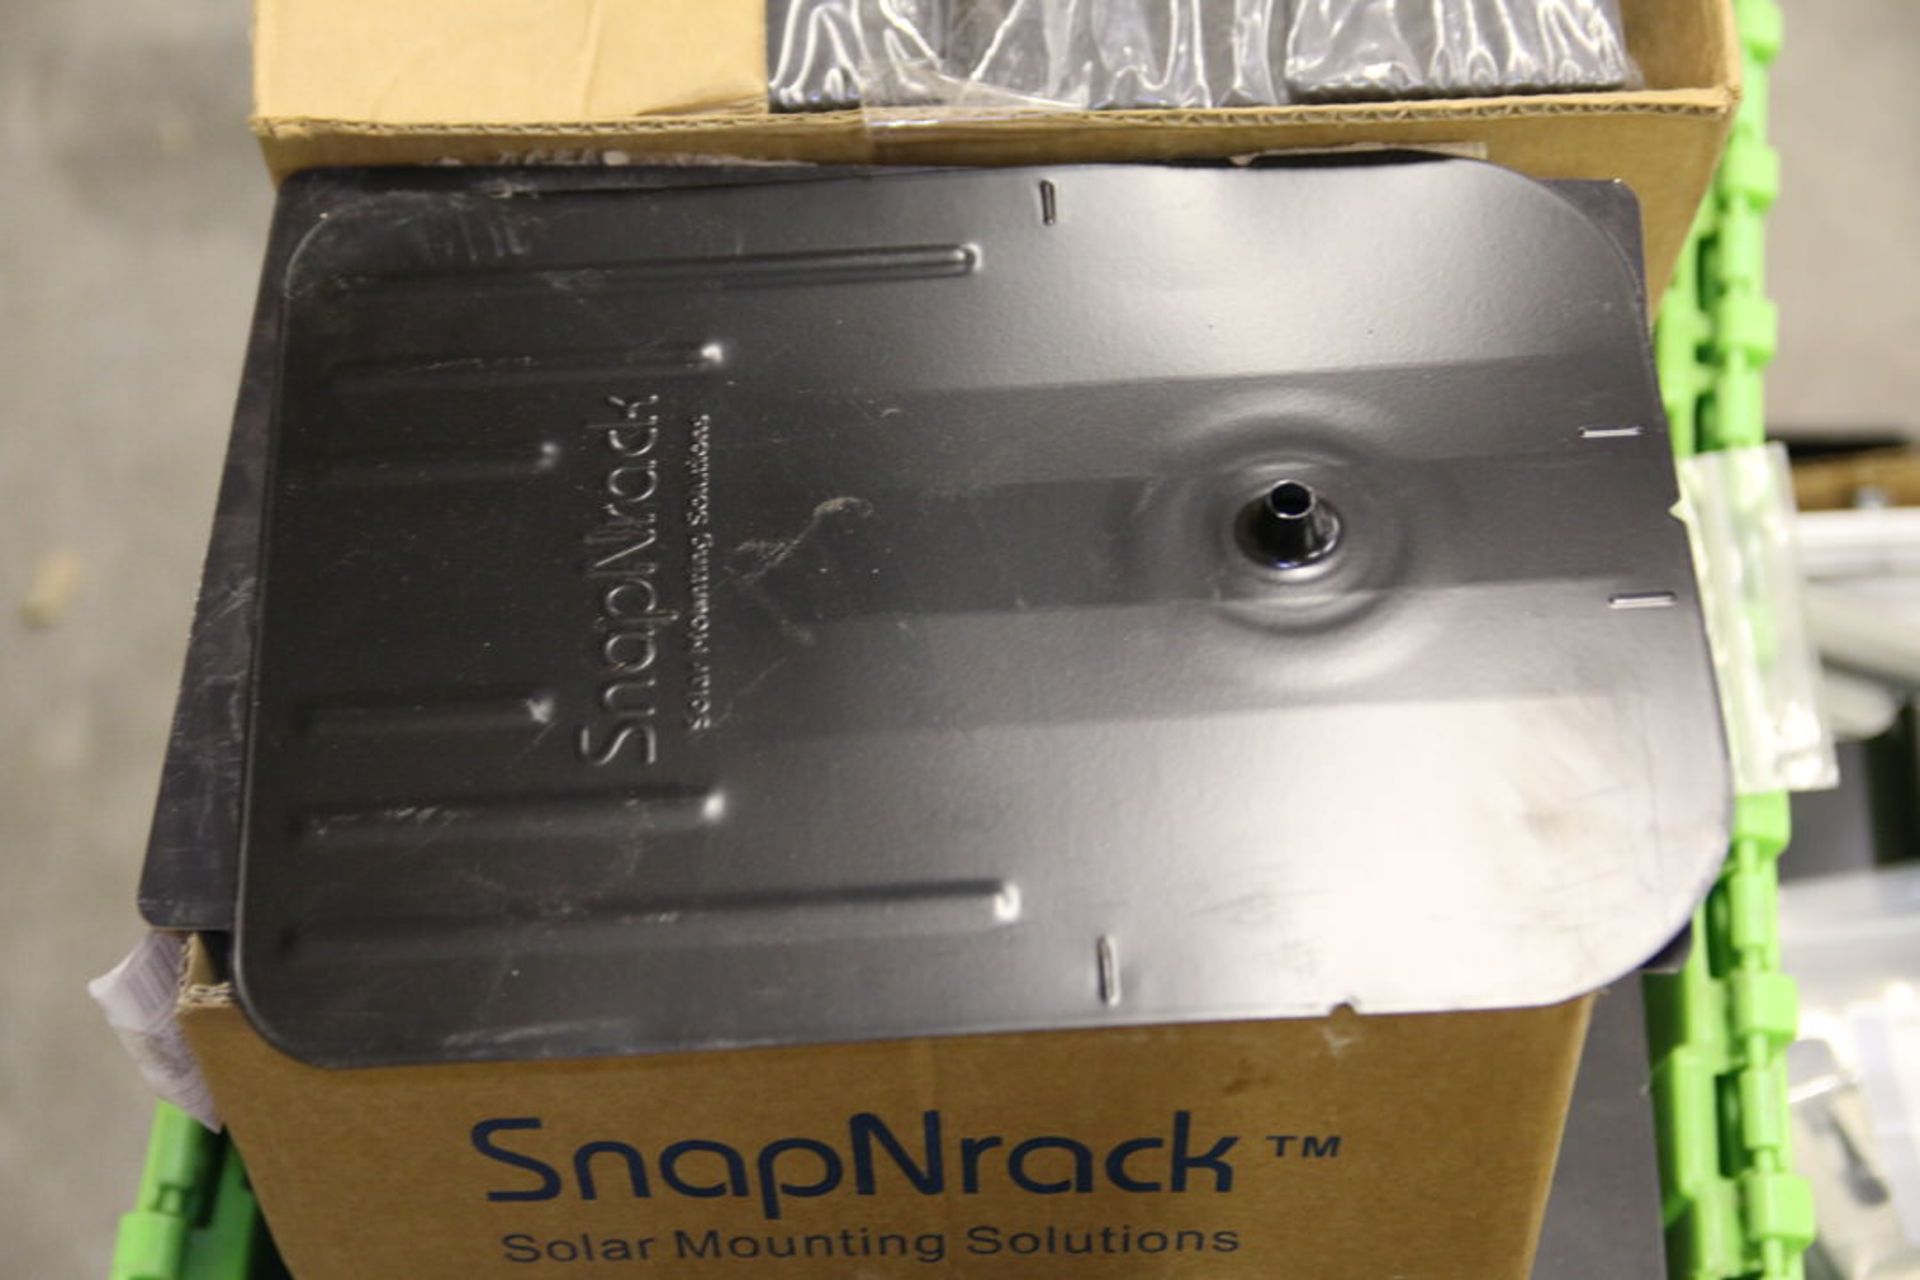 Pallet of SnapNRack Channel Nuts, Rail Splice Assemblies and Aluminum Flashgrip - Image 5 of 5